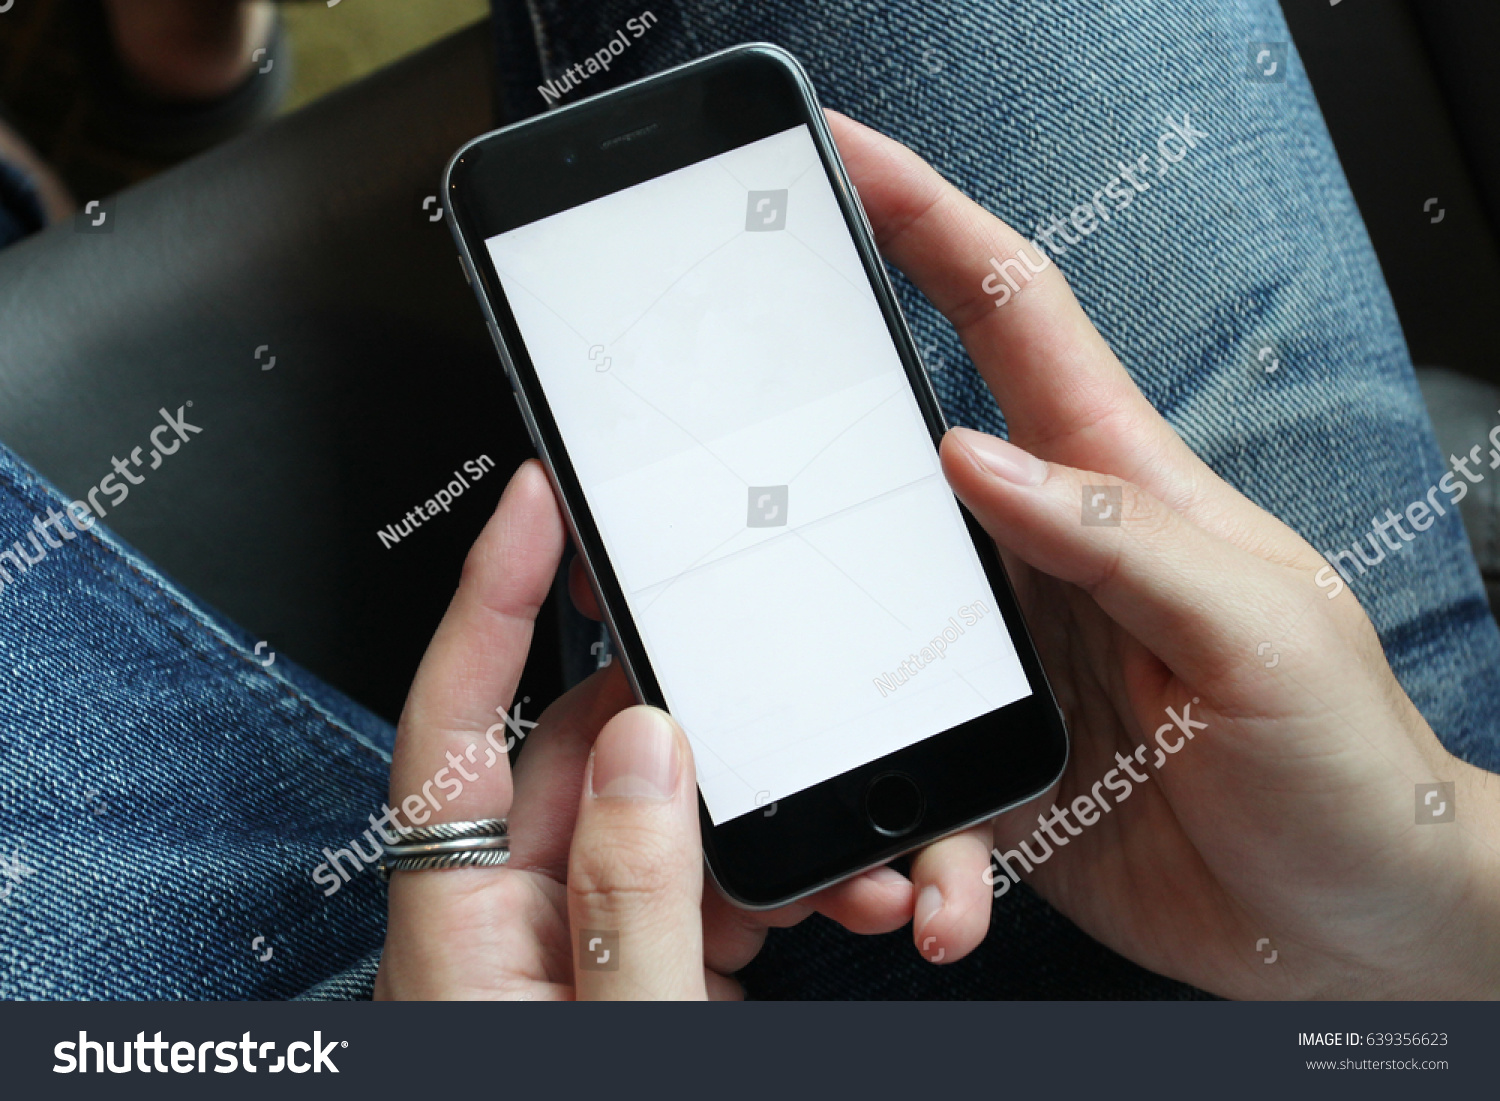 Closeup on a man's hands as he is using a smart phone. #639356623